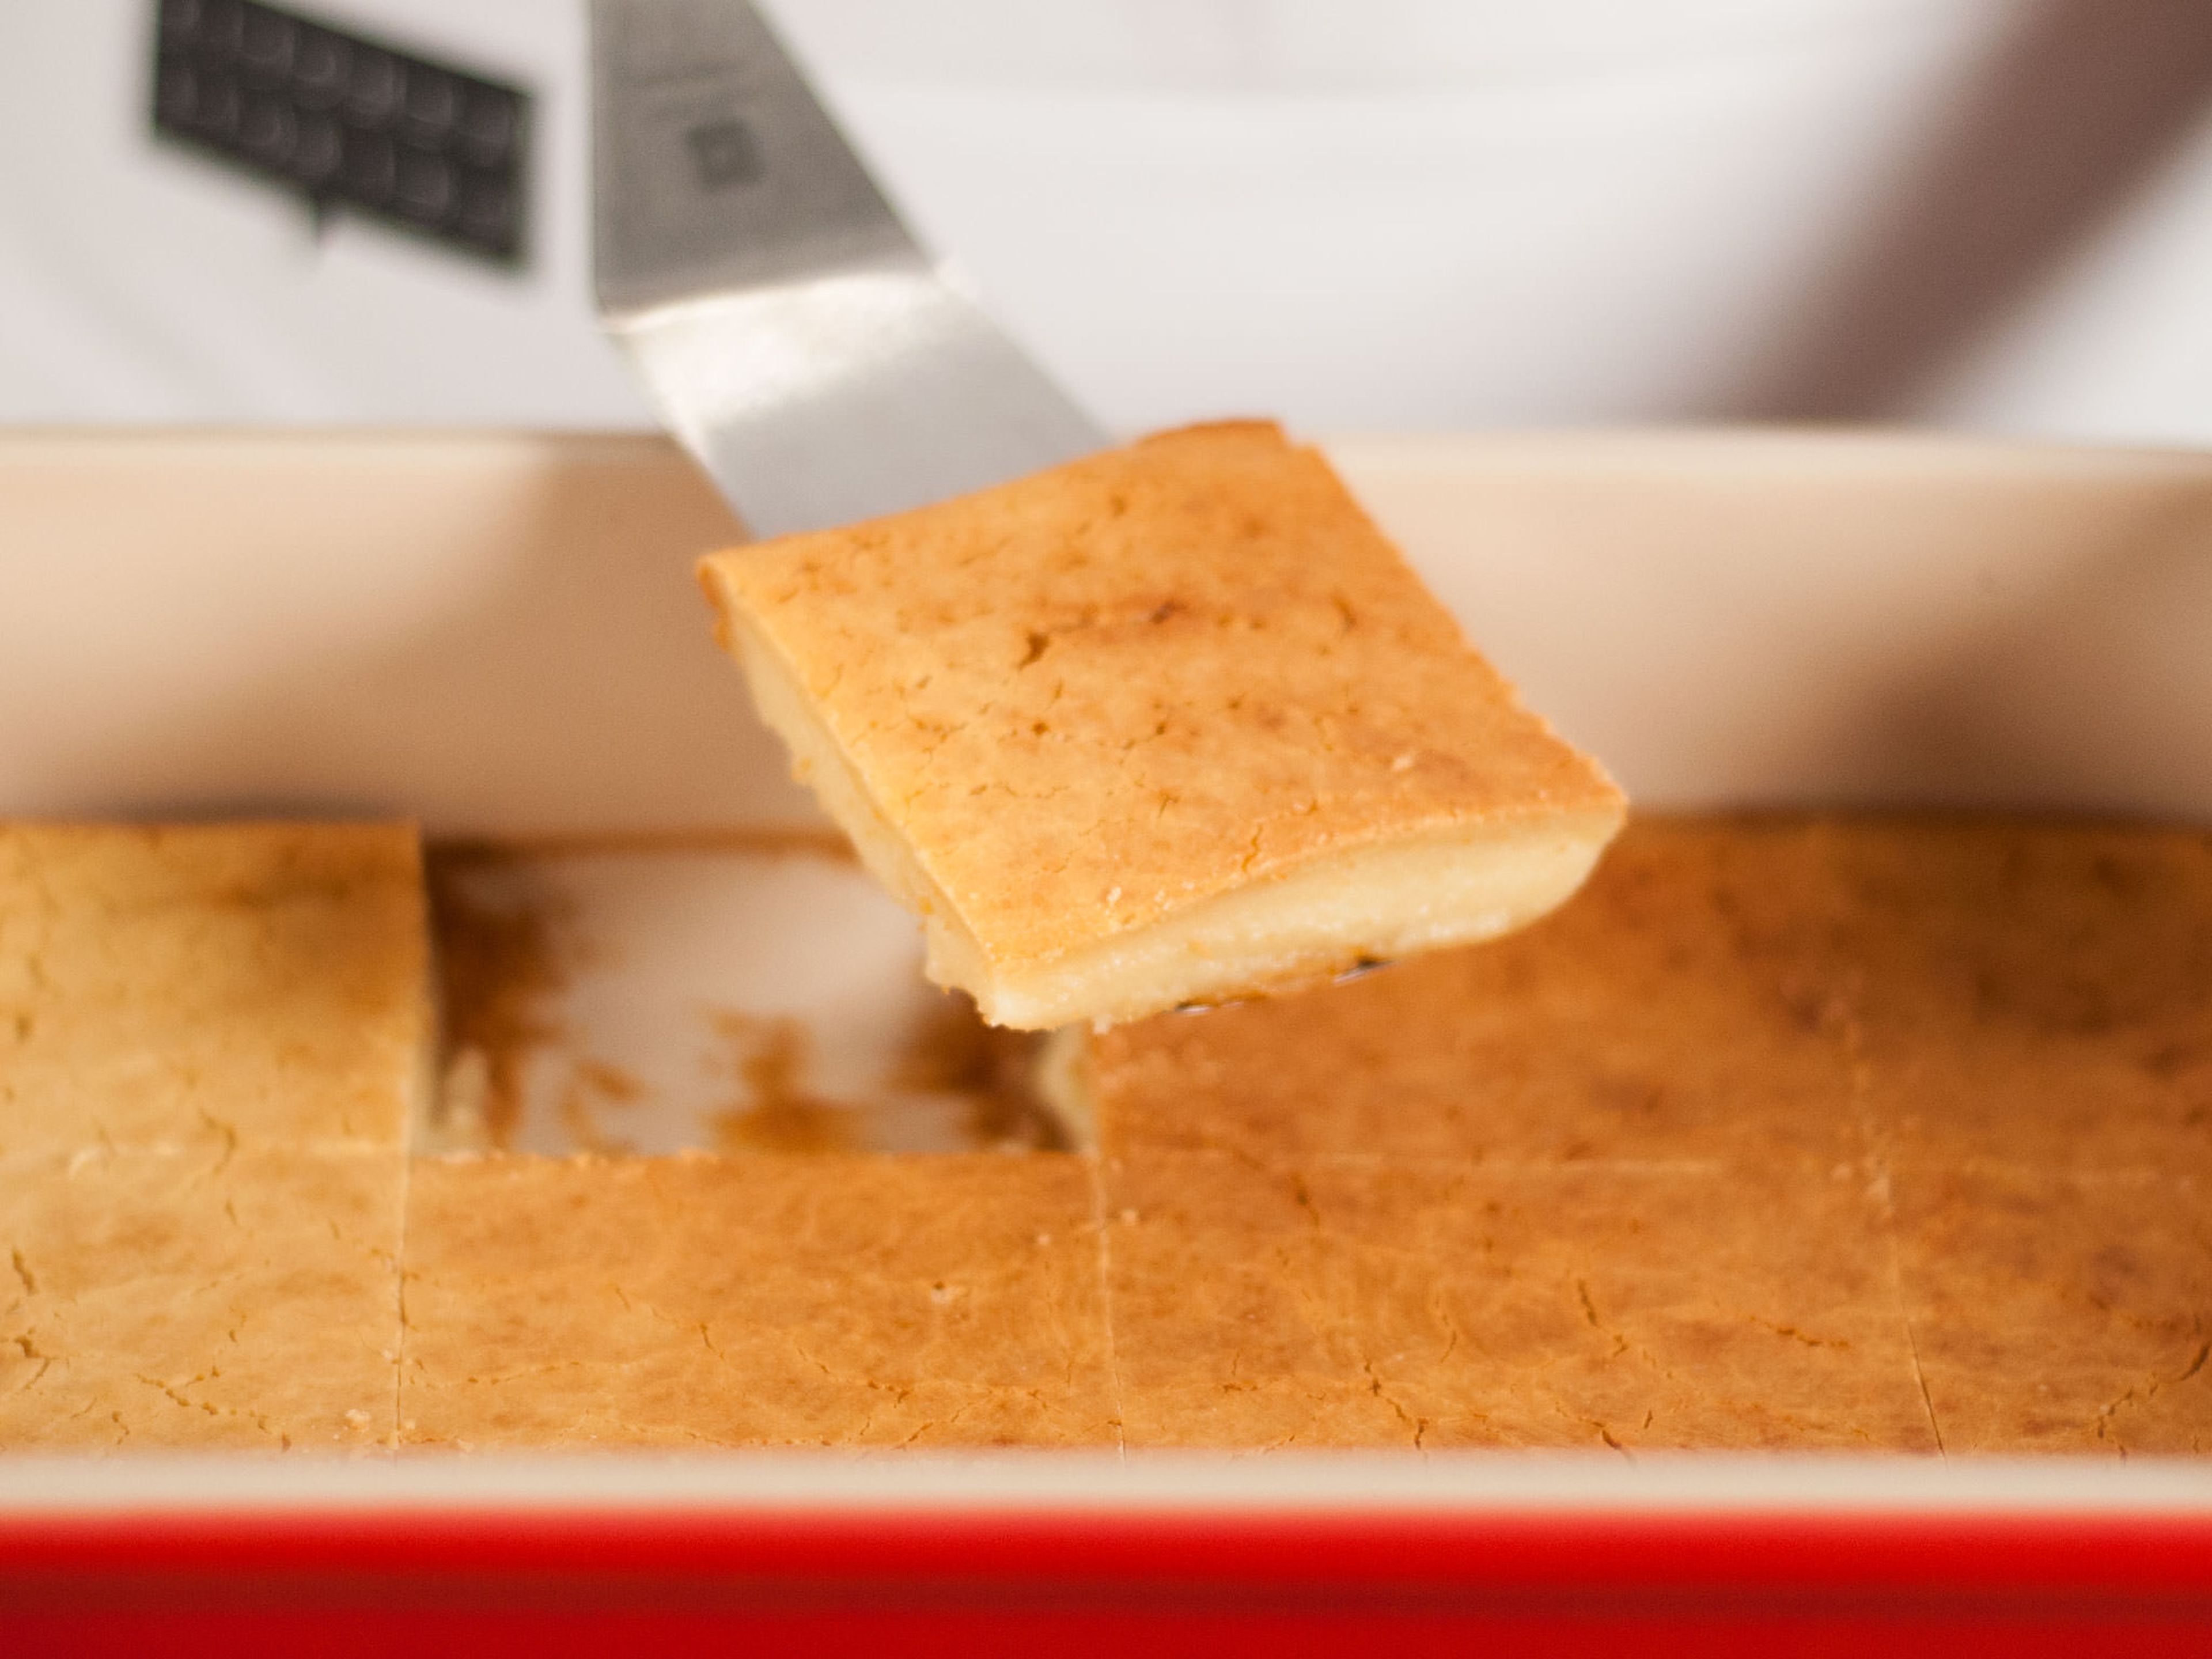 Transfer batter to a casserole dish. Bake in a preheated oven for approx. 30 – 35 min. until golden and an inserted toothpick comes out clean. Cut into pieces and enjoy with friends and family!